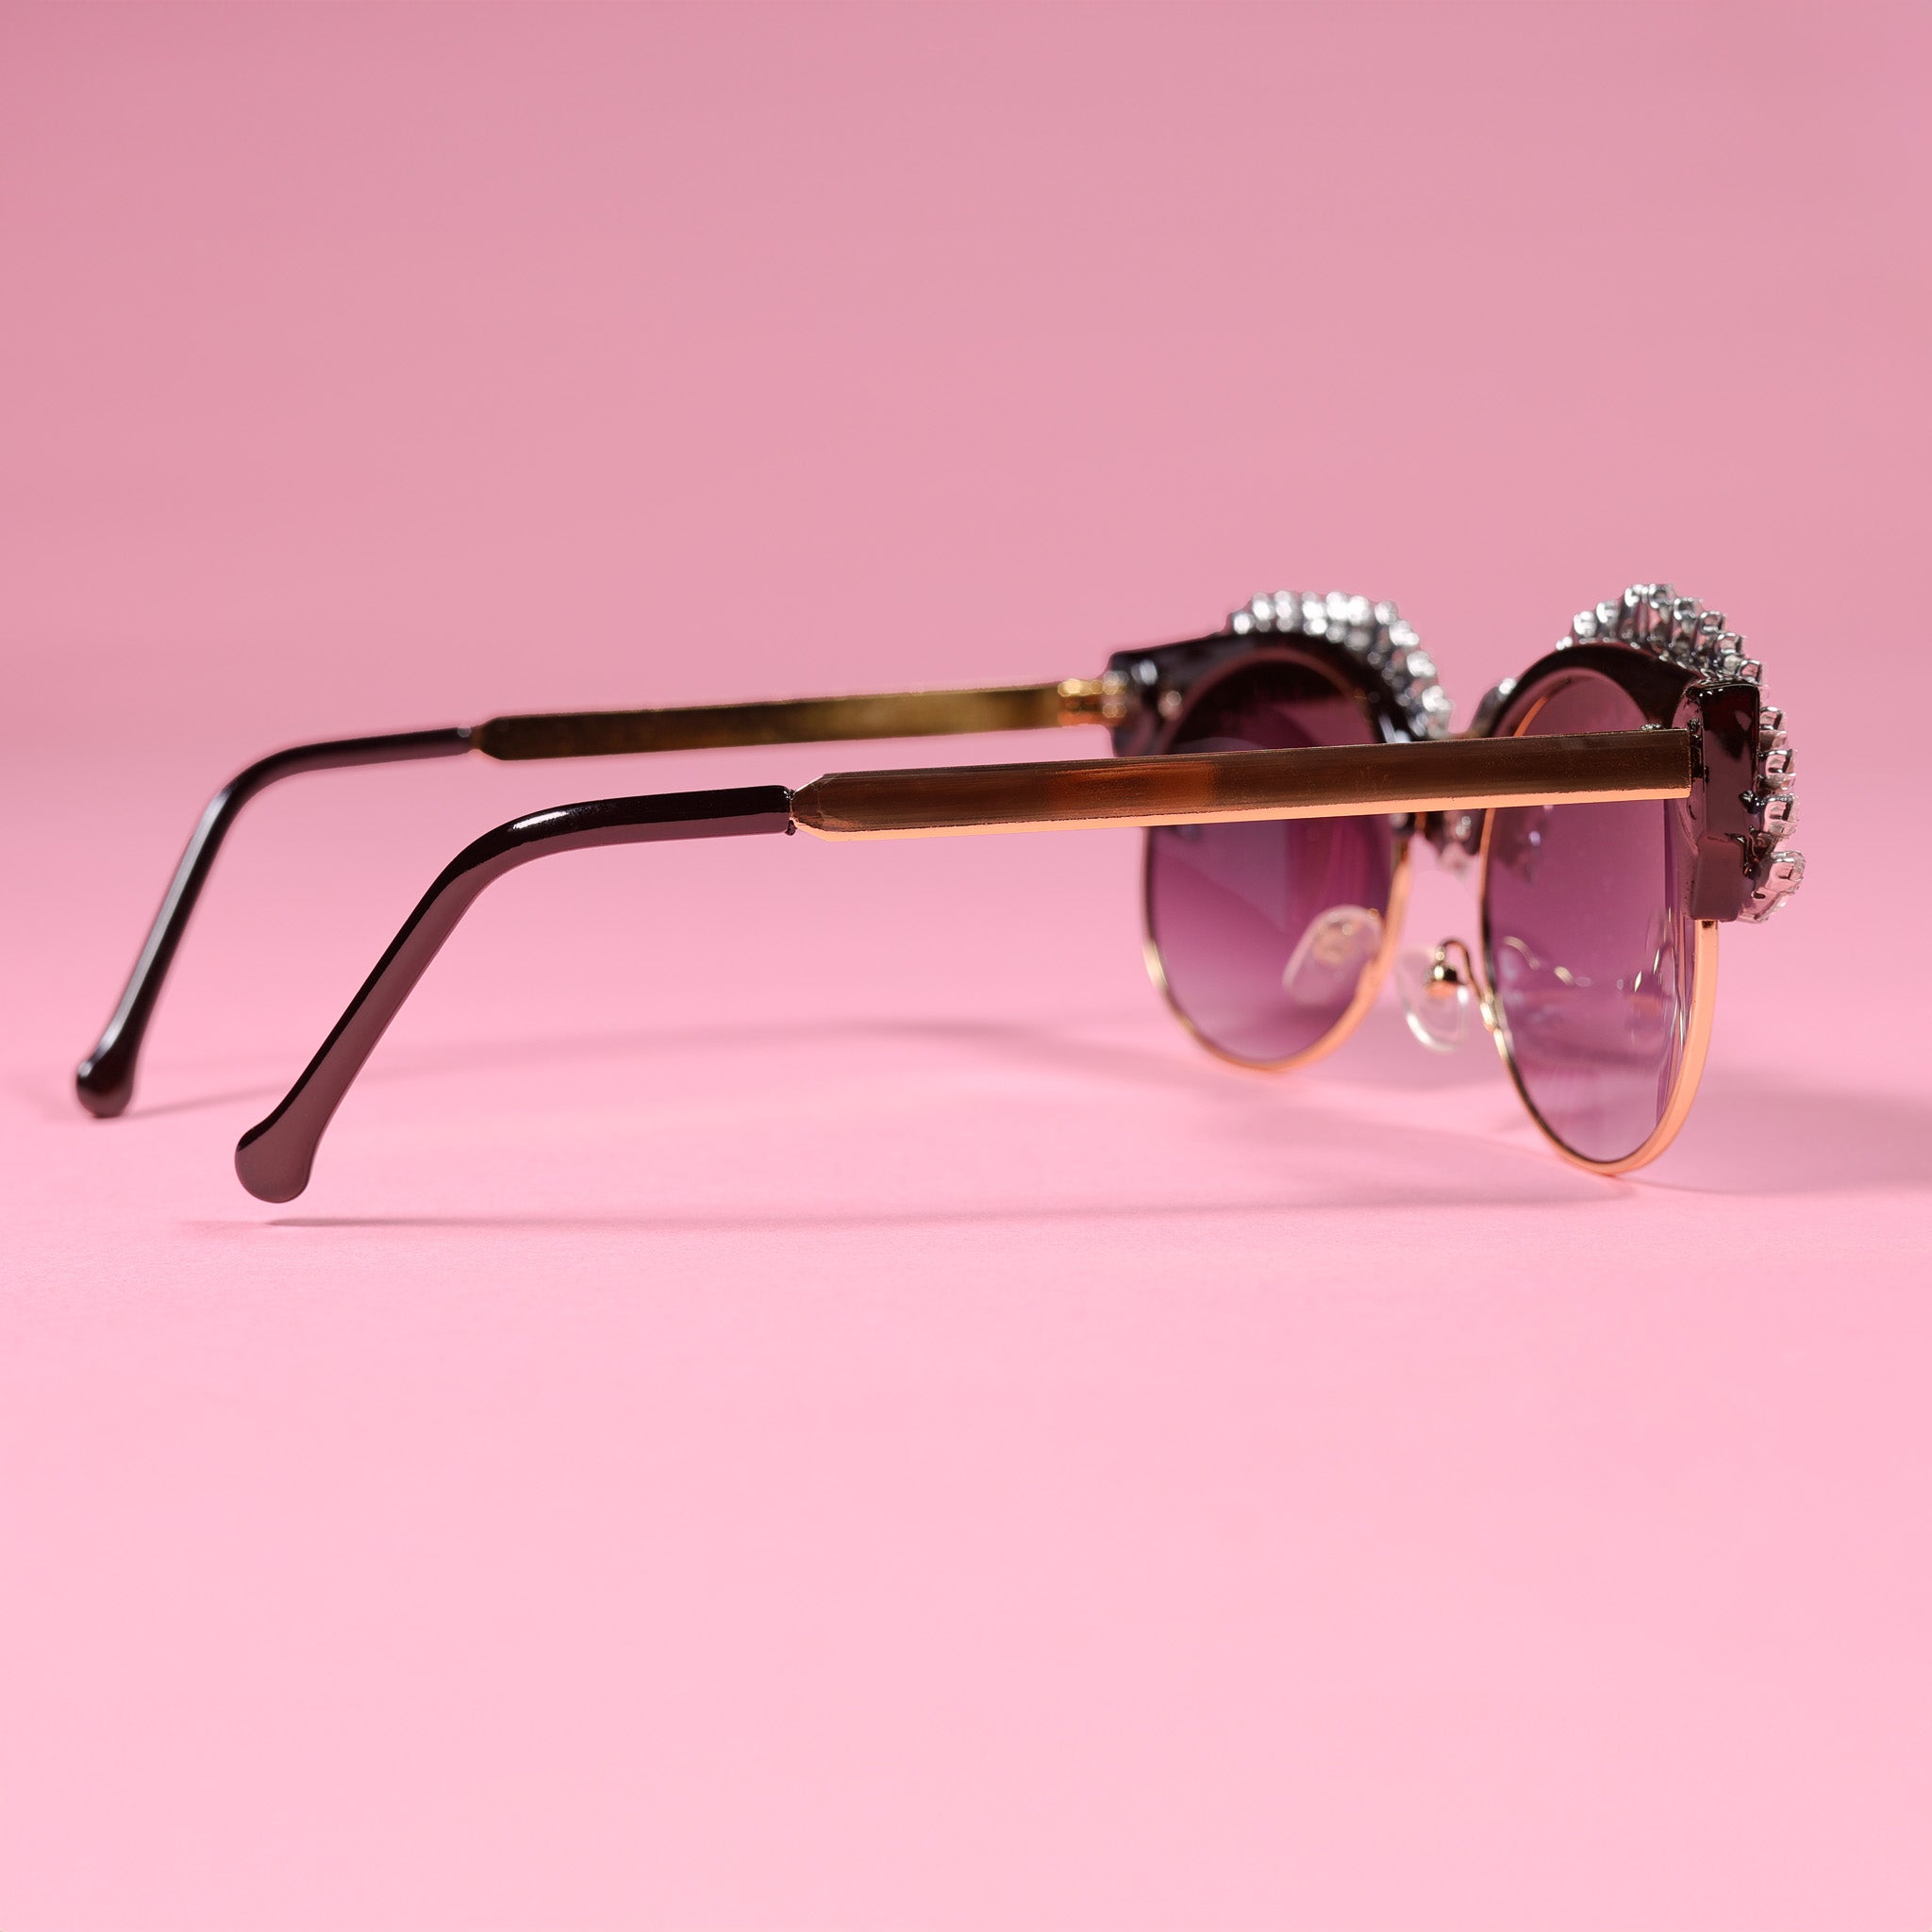 a pair of sunglasses on a pink background